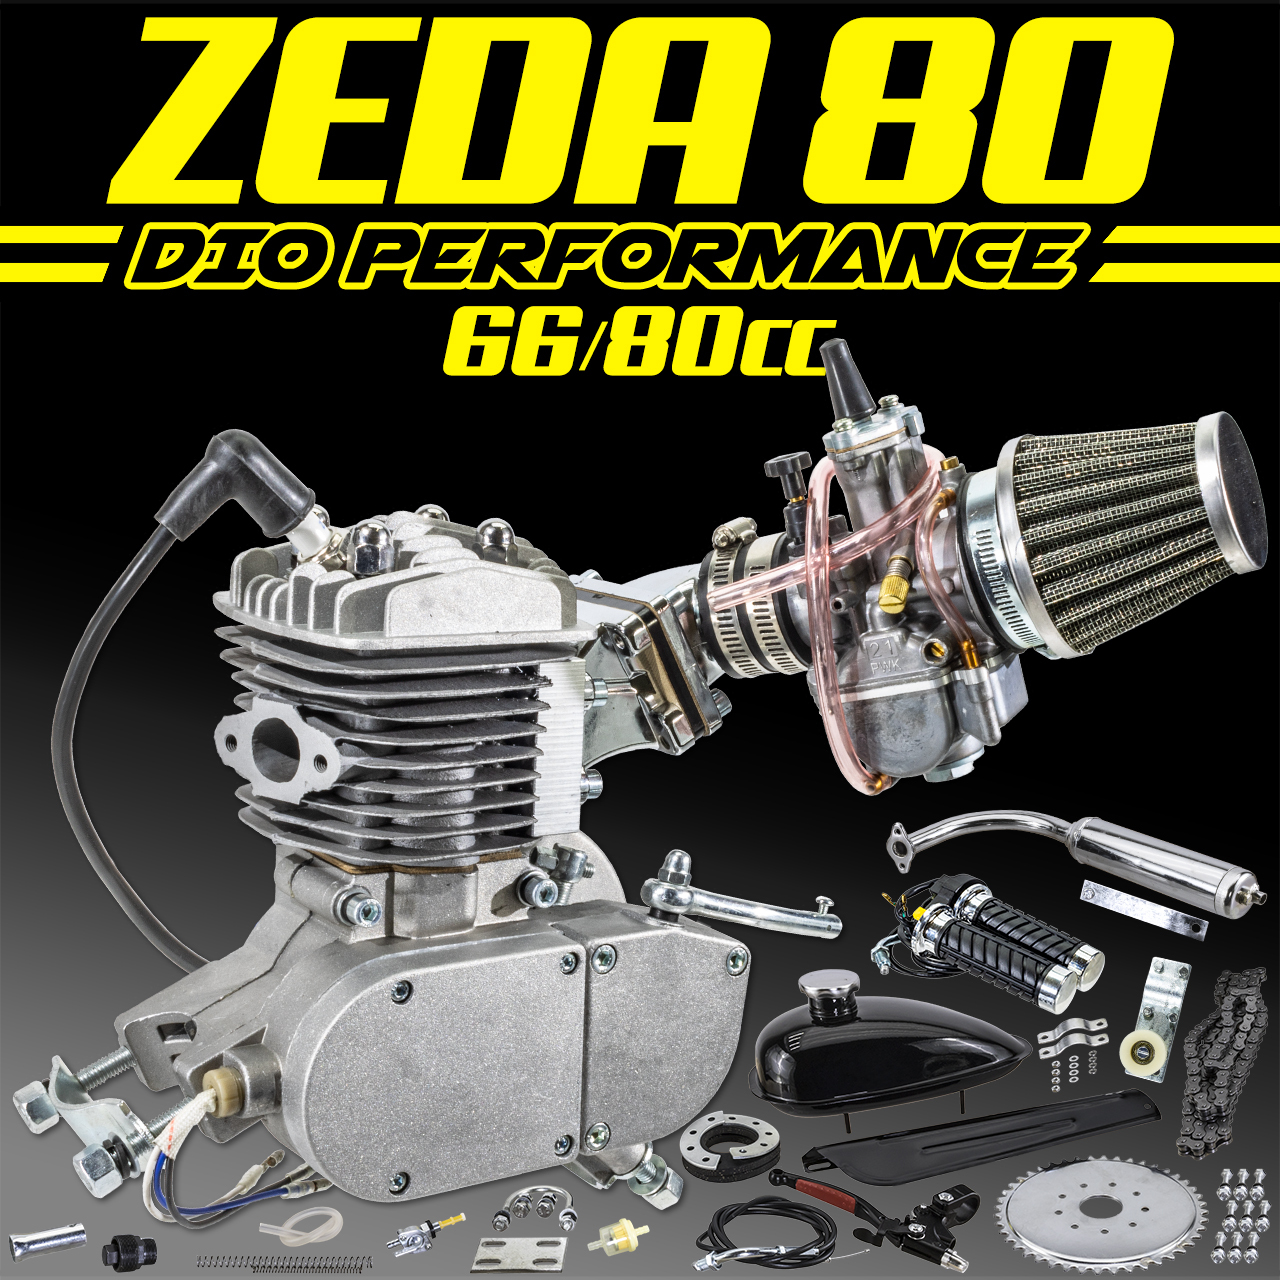 Zeda 80 Performance 2 Stroke Bicycle Engine Kit With Dio Reed Valve & OKO  Carb - Silver - Bicycle-Engines.com